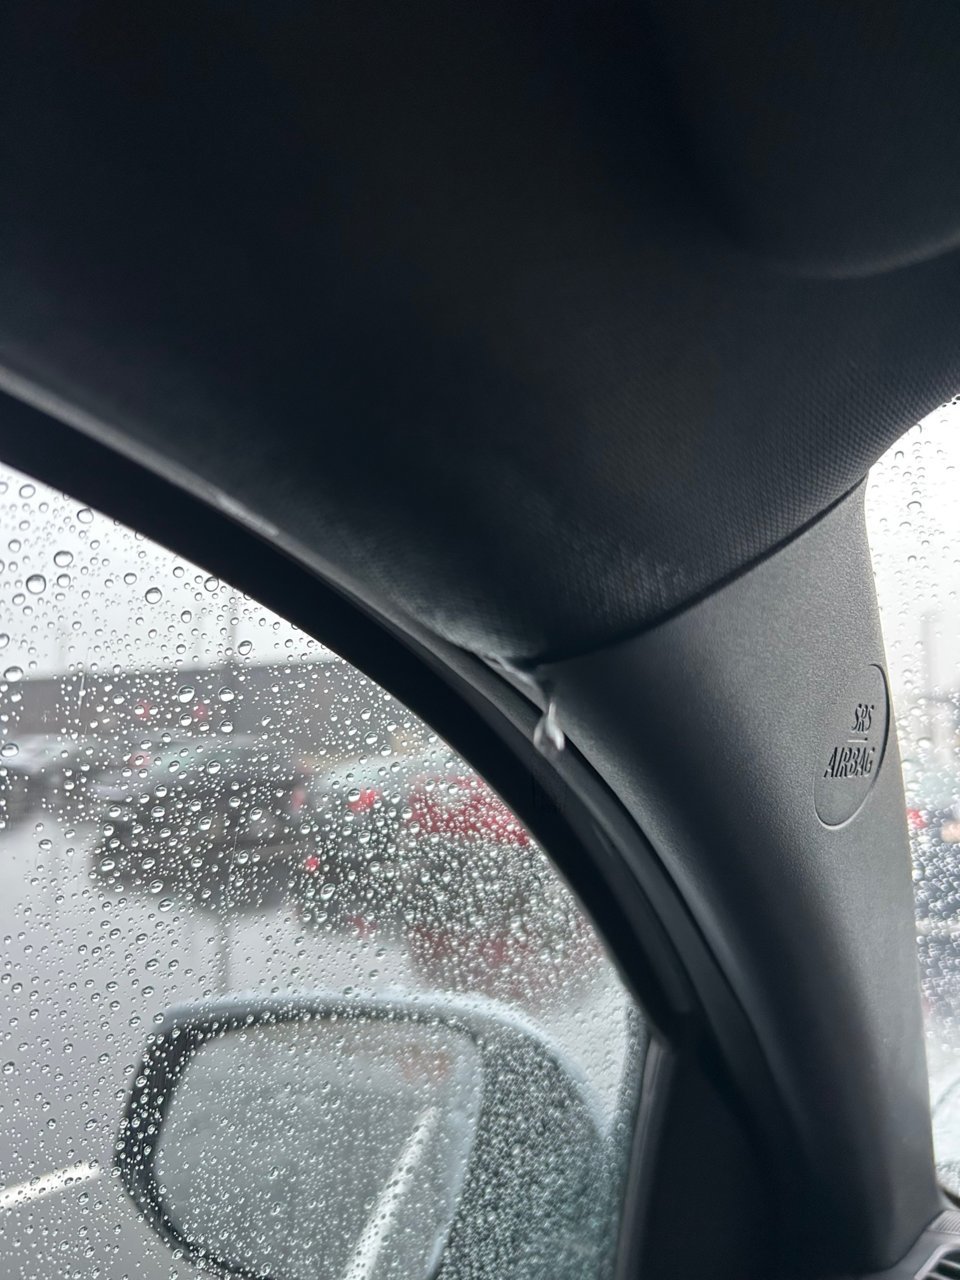 How to unclog a Sunroof Drain - water leaking inside the car at